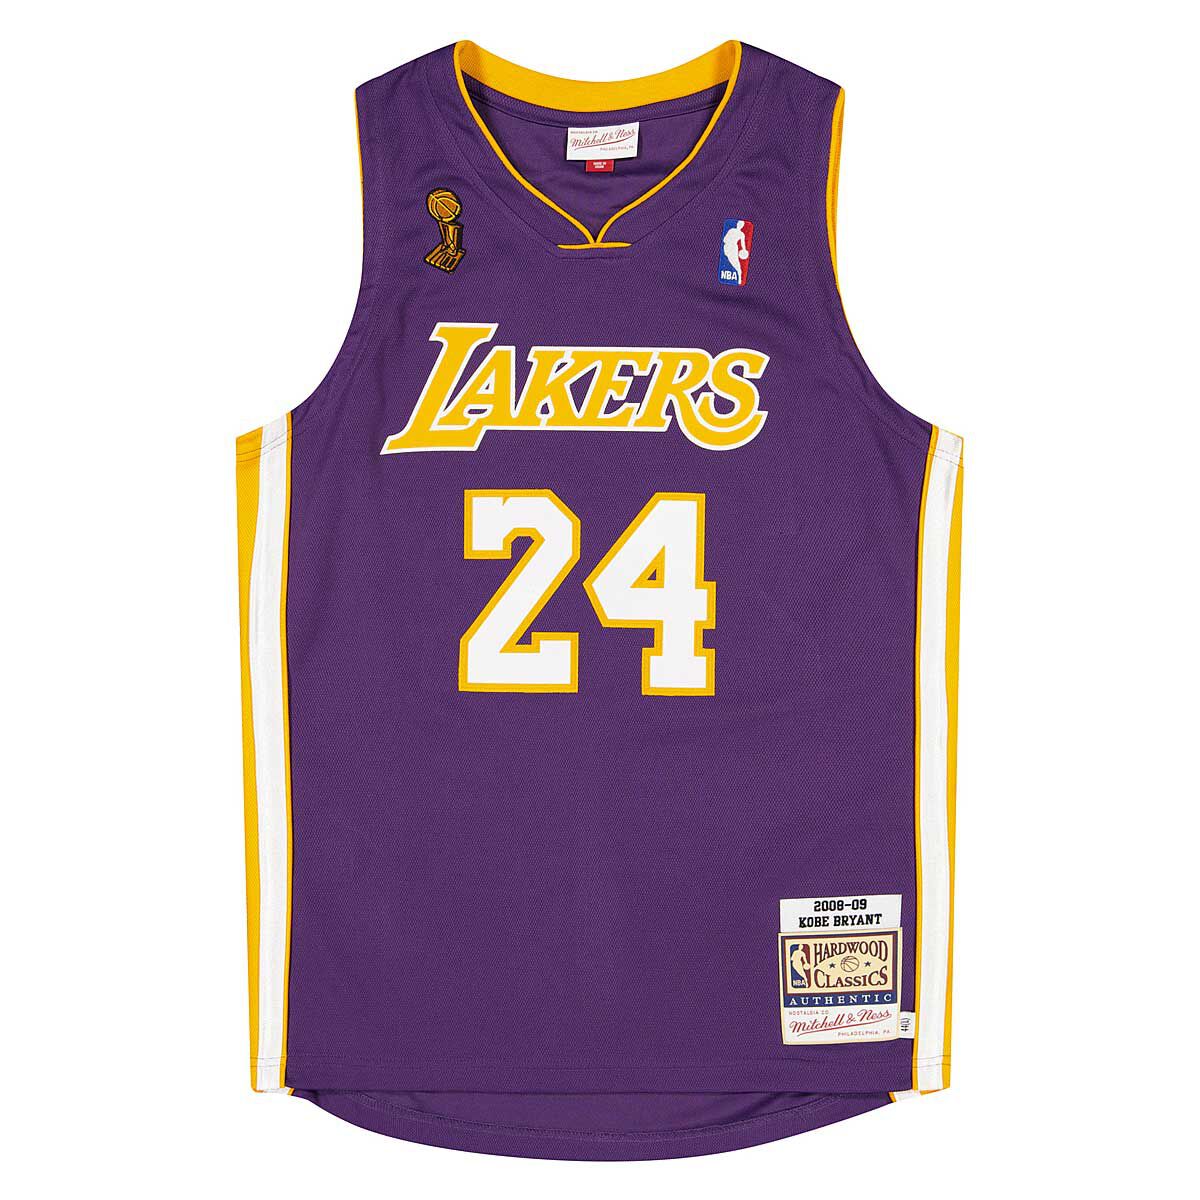 NBA LOS ANGELES LAKERS AUTHENTIC JERSEY KOBE BRYANT #24 '08-'09